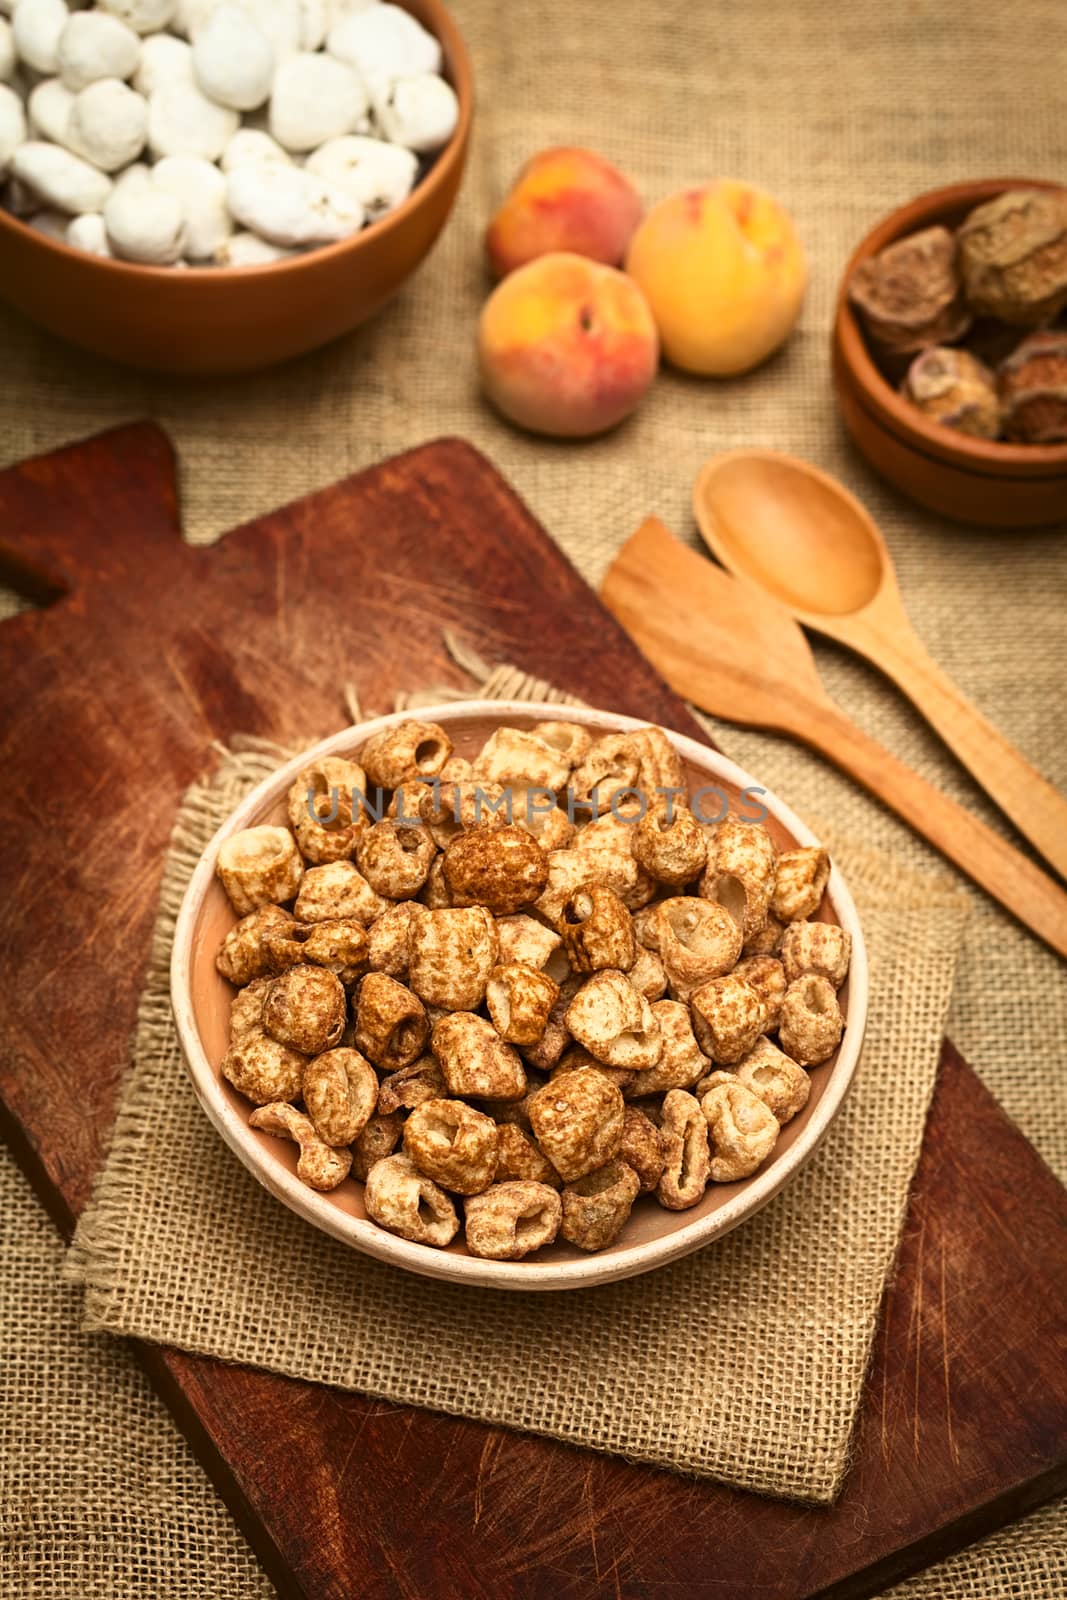 Caramelized roasted pasta, a popular Bolivian snack, served in small bowl with peach in the back, photographed  with natural light (Selective Focus, Focus on the top of the snack in the bowl)